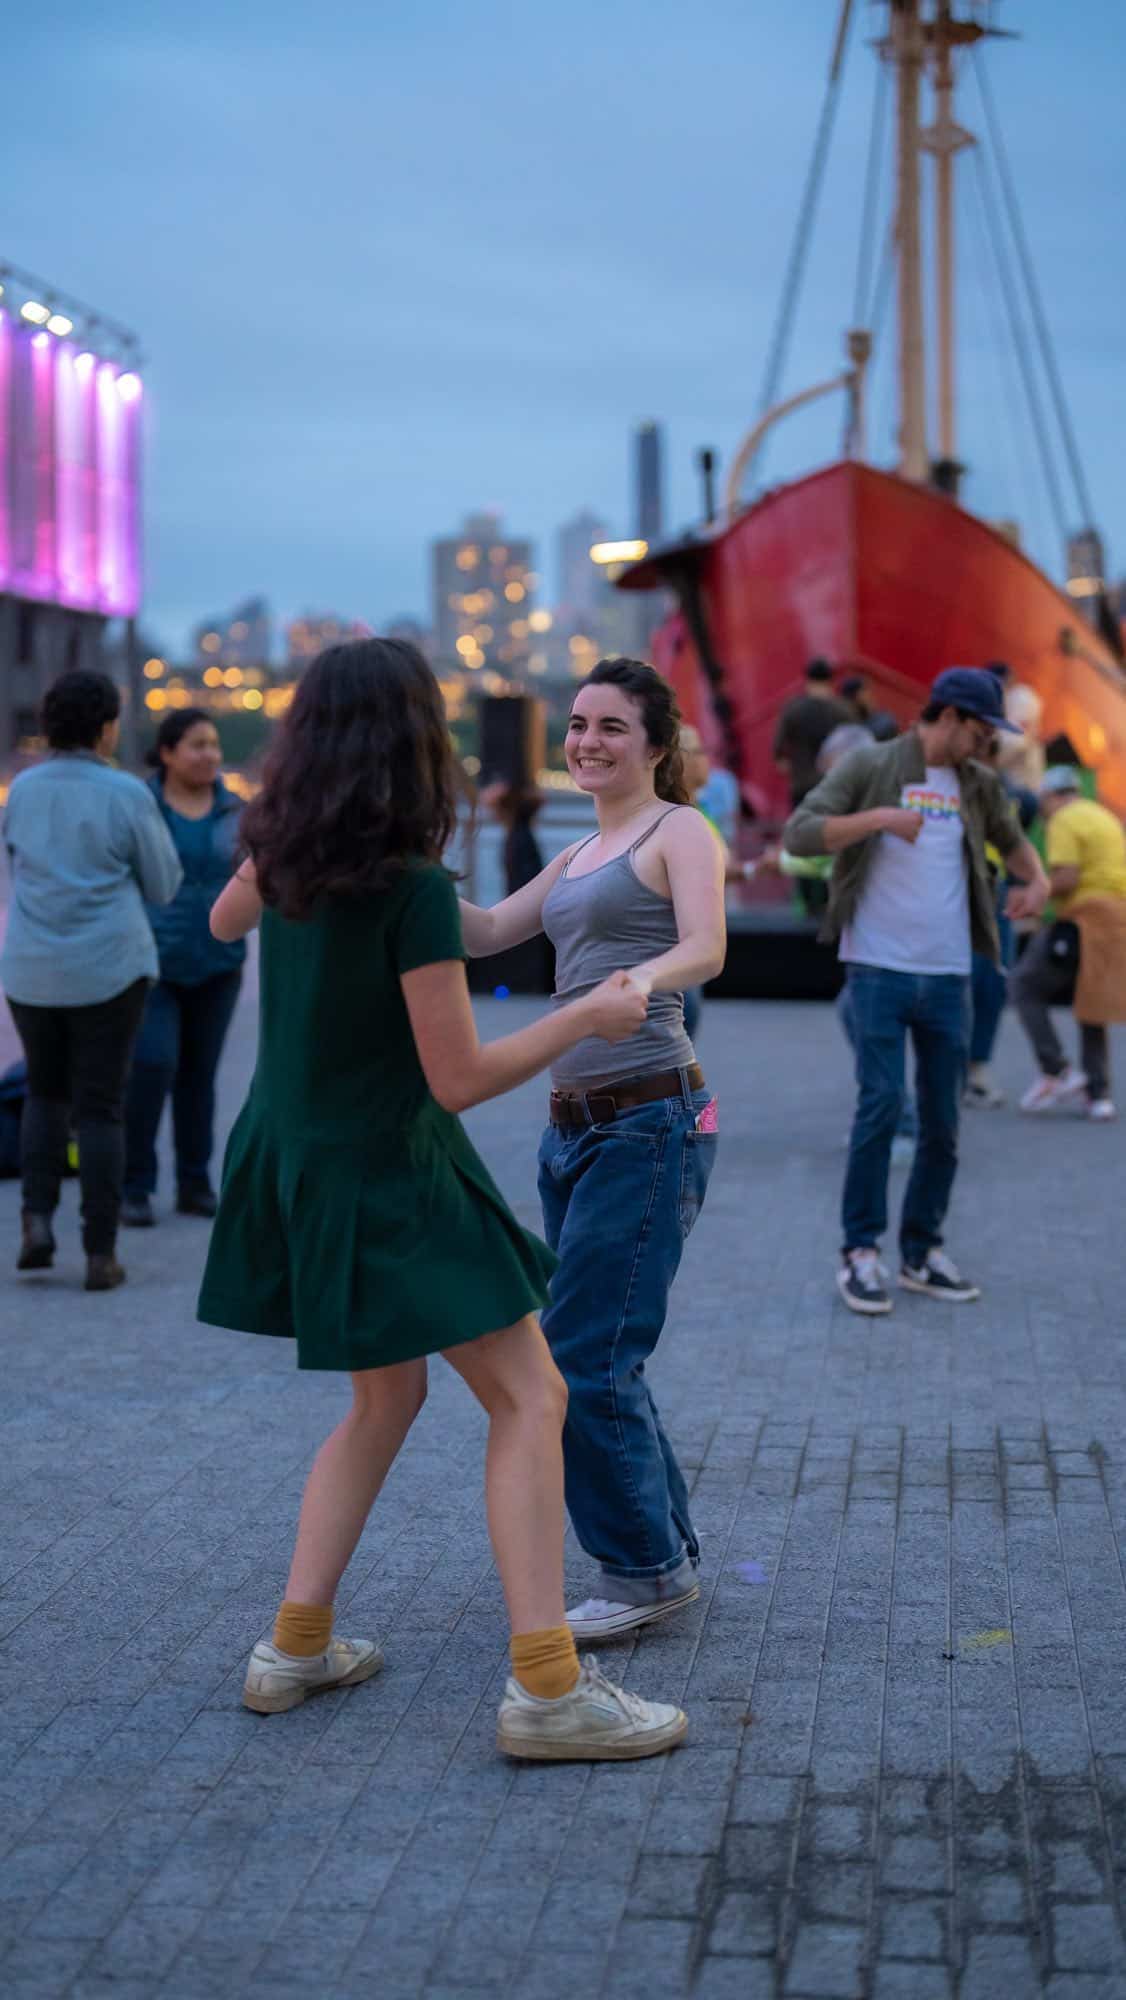 Ready to bring your best dance moves? Join in for an incredible Silent Disco party TONIGHT at @pearalley.nyc. Bring your friends and get your groove on at this immersive event 

🗓️ Friday, 9/22
 9:00pm
 Pearl Alley | Pier 17

Details ➤ link in bio